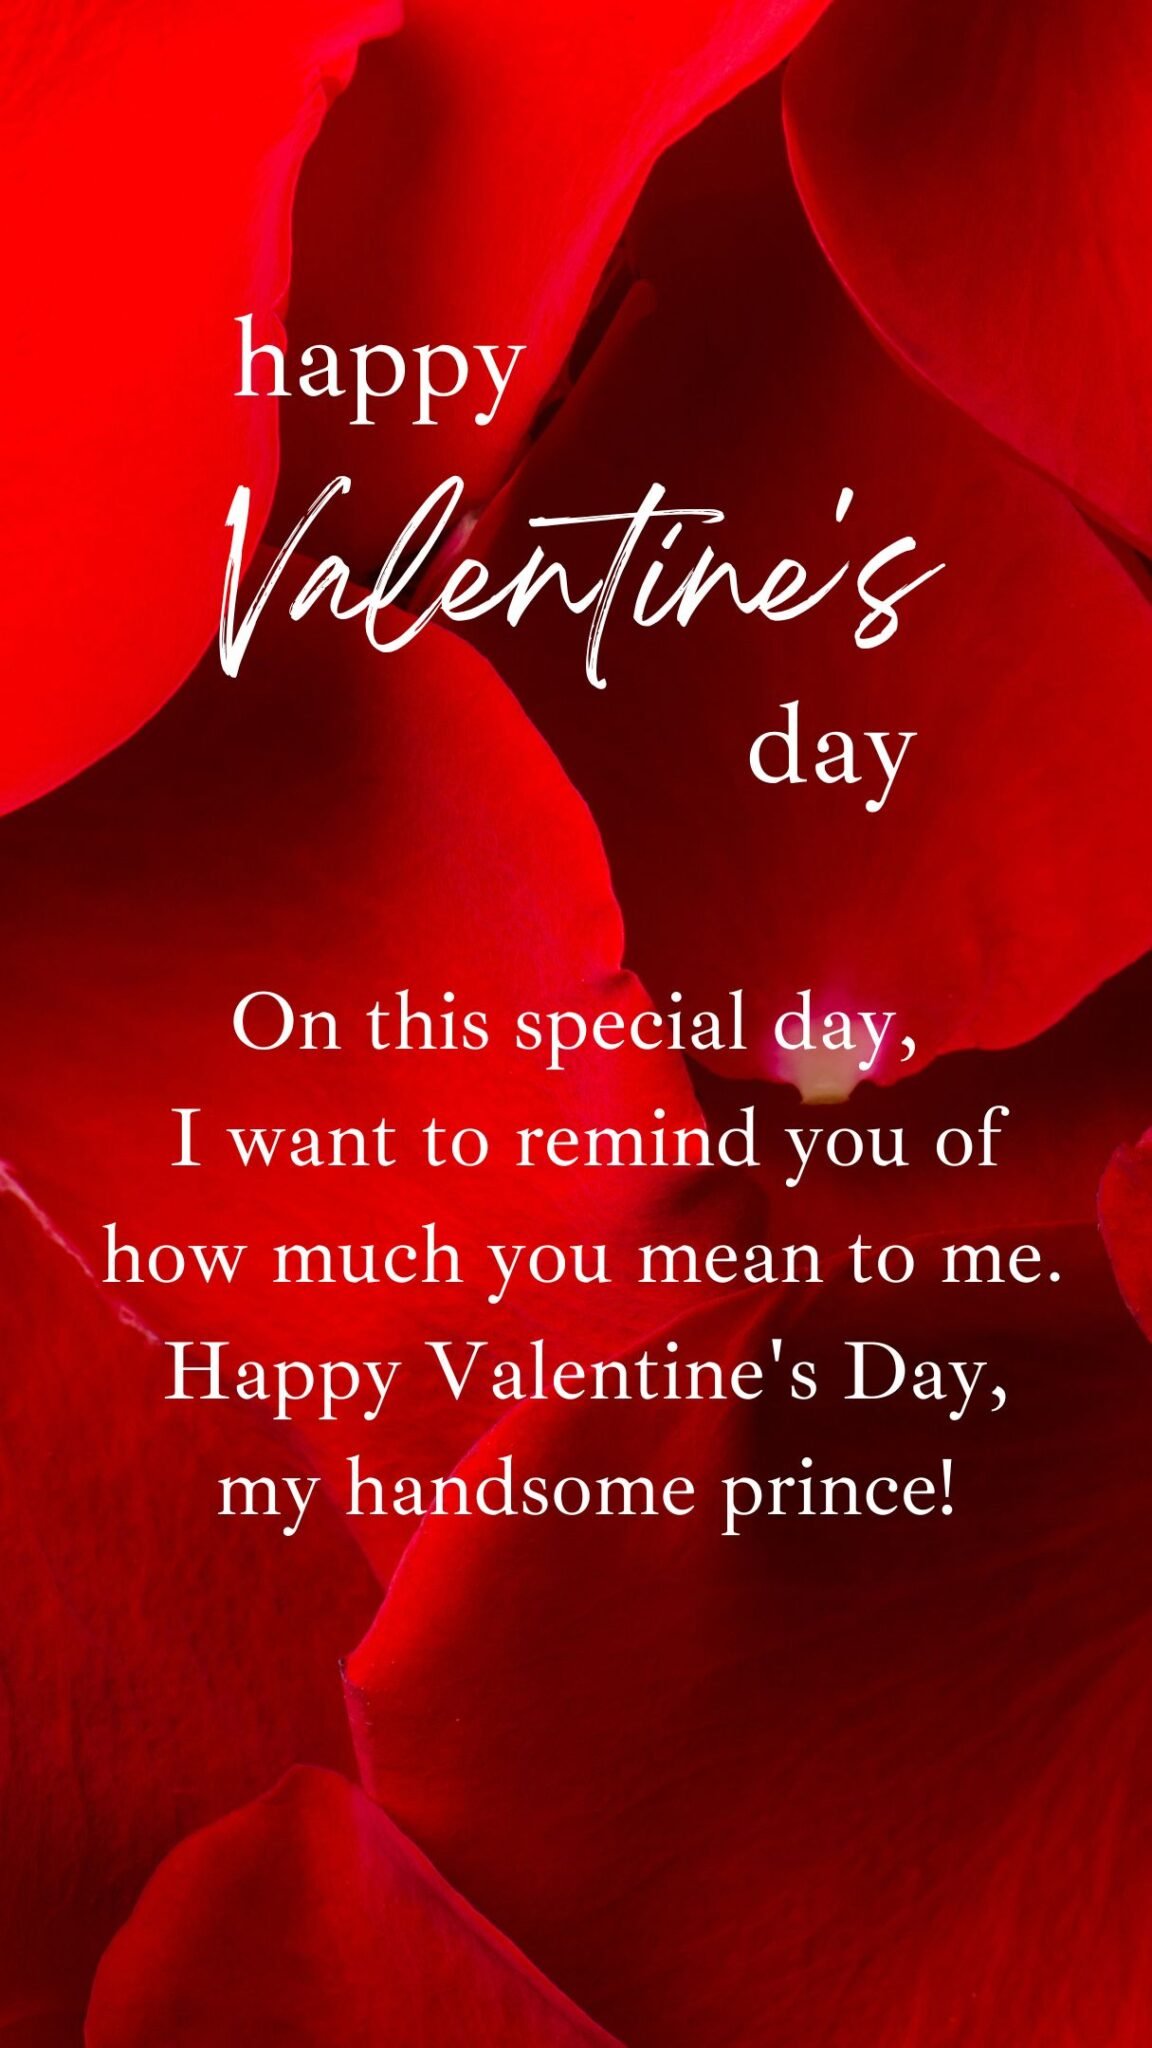 140 Happy Valentine’s Day Wishes for Boyfriend/Him (With Images ...